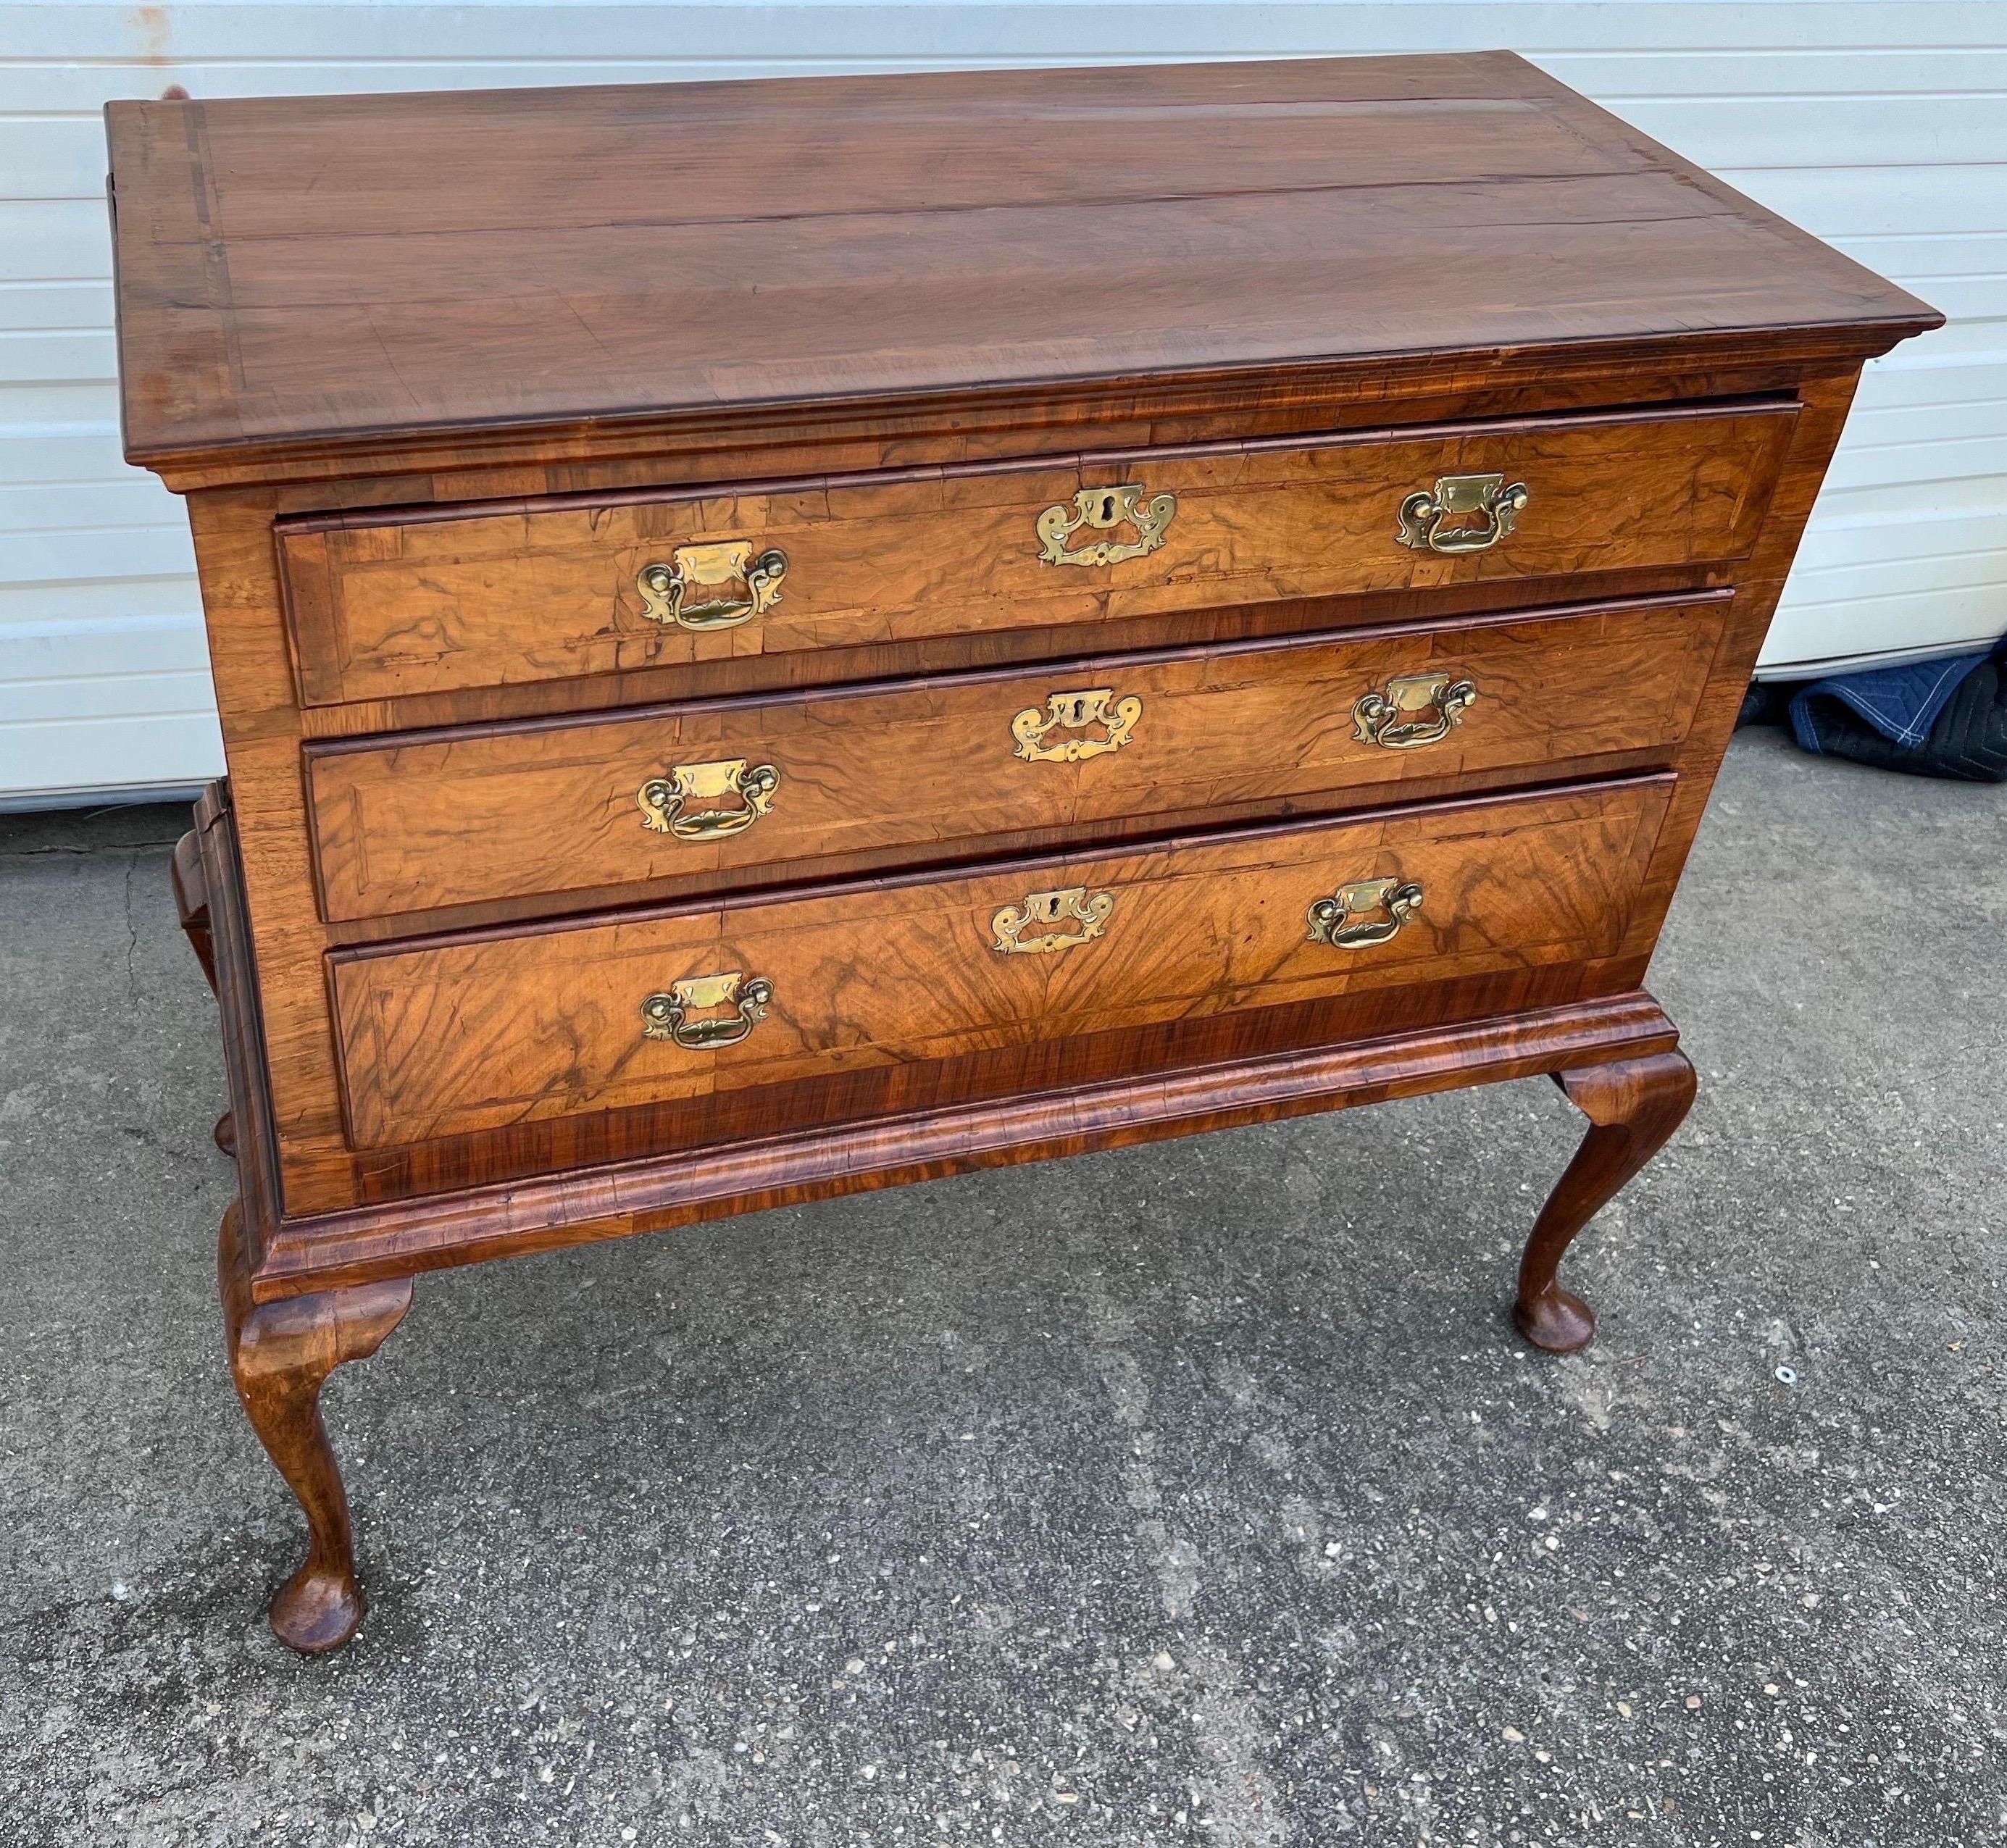 18th Century English Queen Anne crossbanded walnut chest on frame. Three herringbone inlaid drawers with original 18th century pulls on frame with Queen Anne pad feet. Top is beautifully crossbanded and herringbone inlaid. Charming old shrinkage